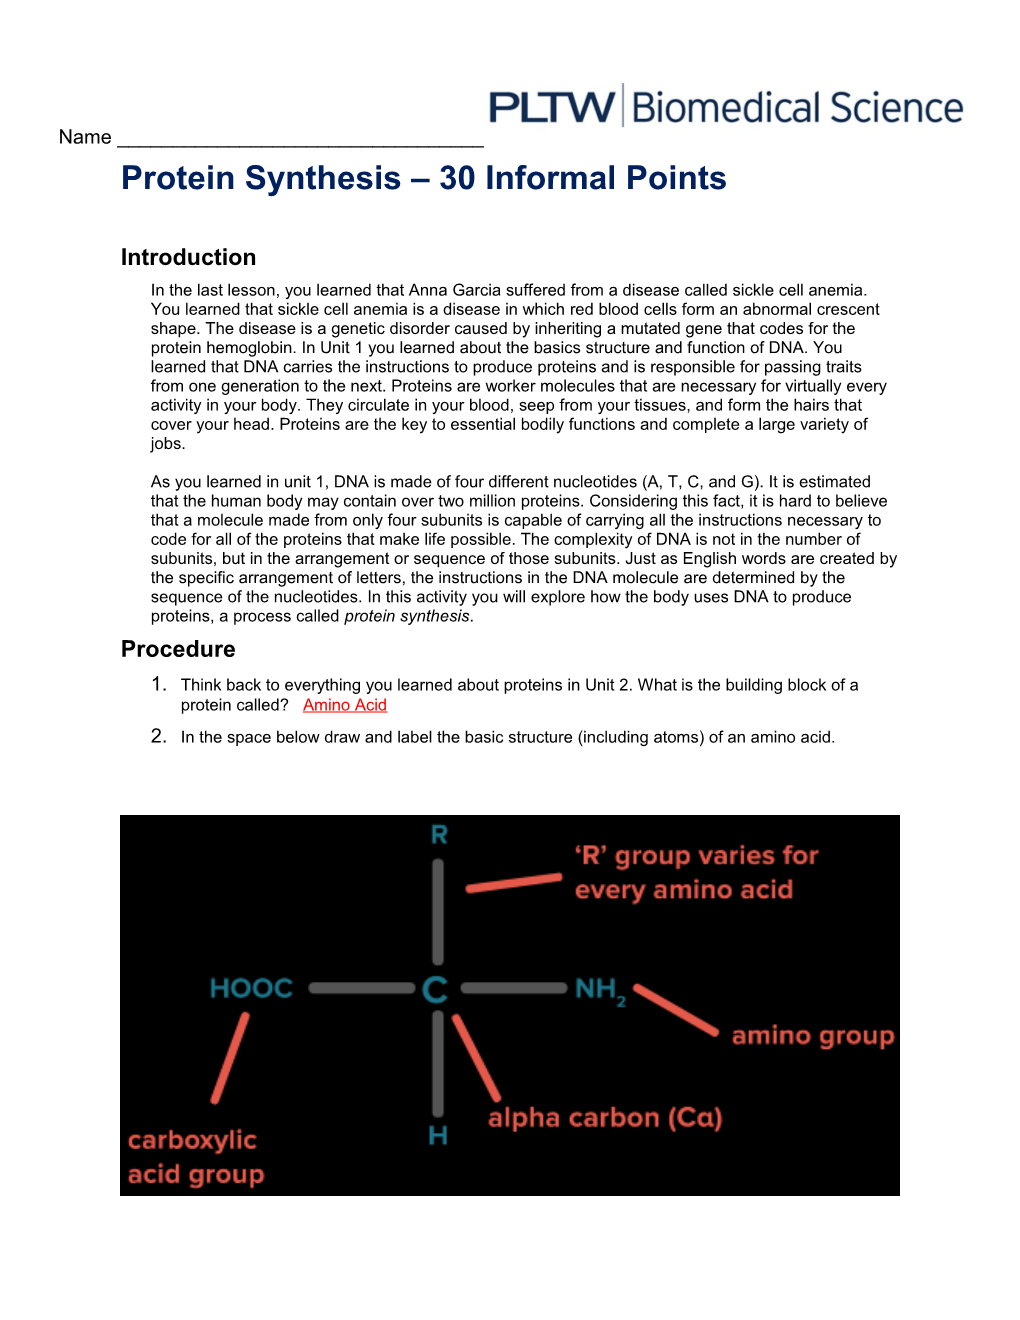 Protein Synthesis 30 Informal Points